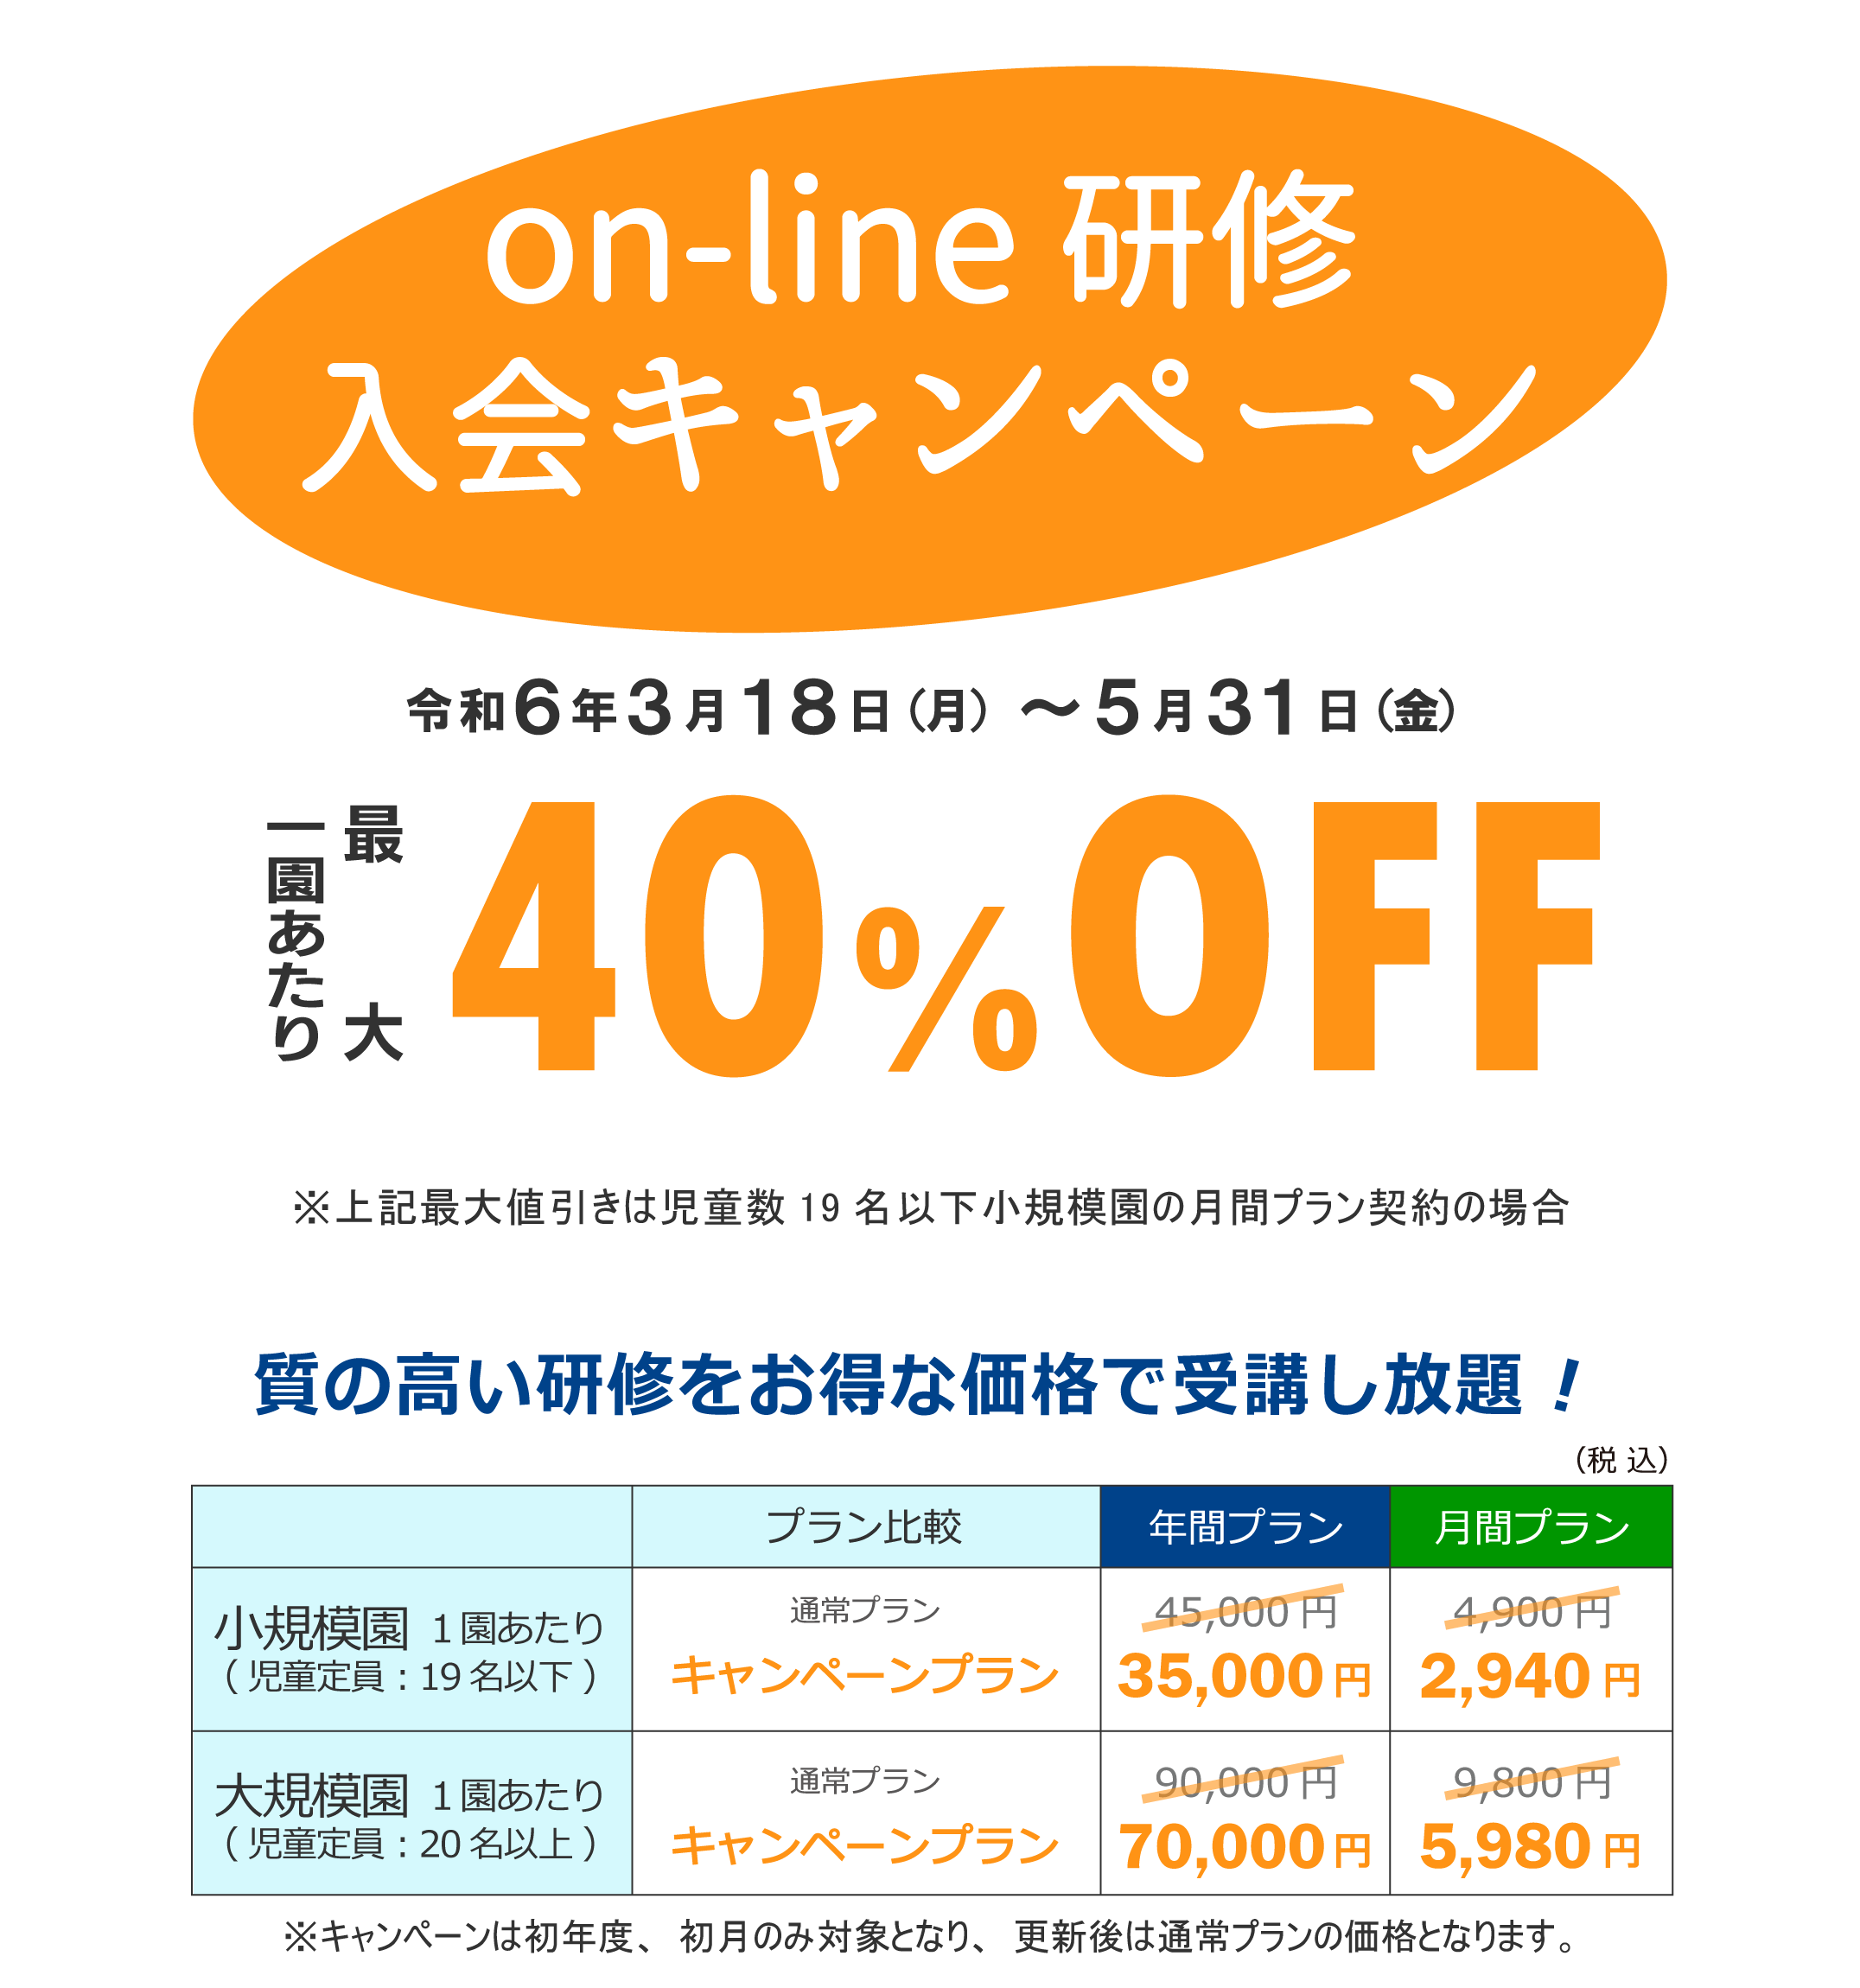 on-line研修入会キャンペーン　一園あたり最大40％OFF